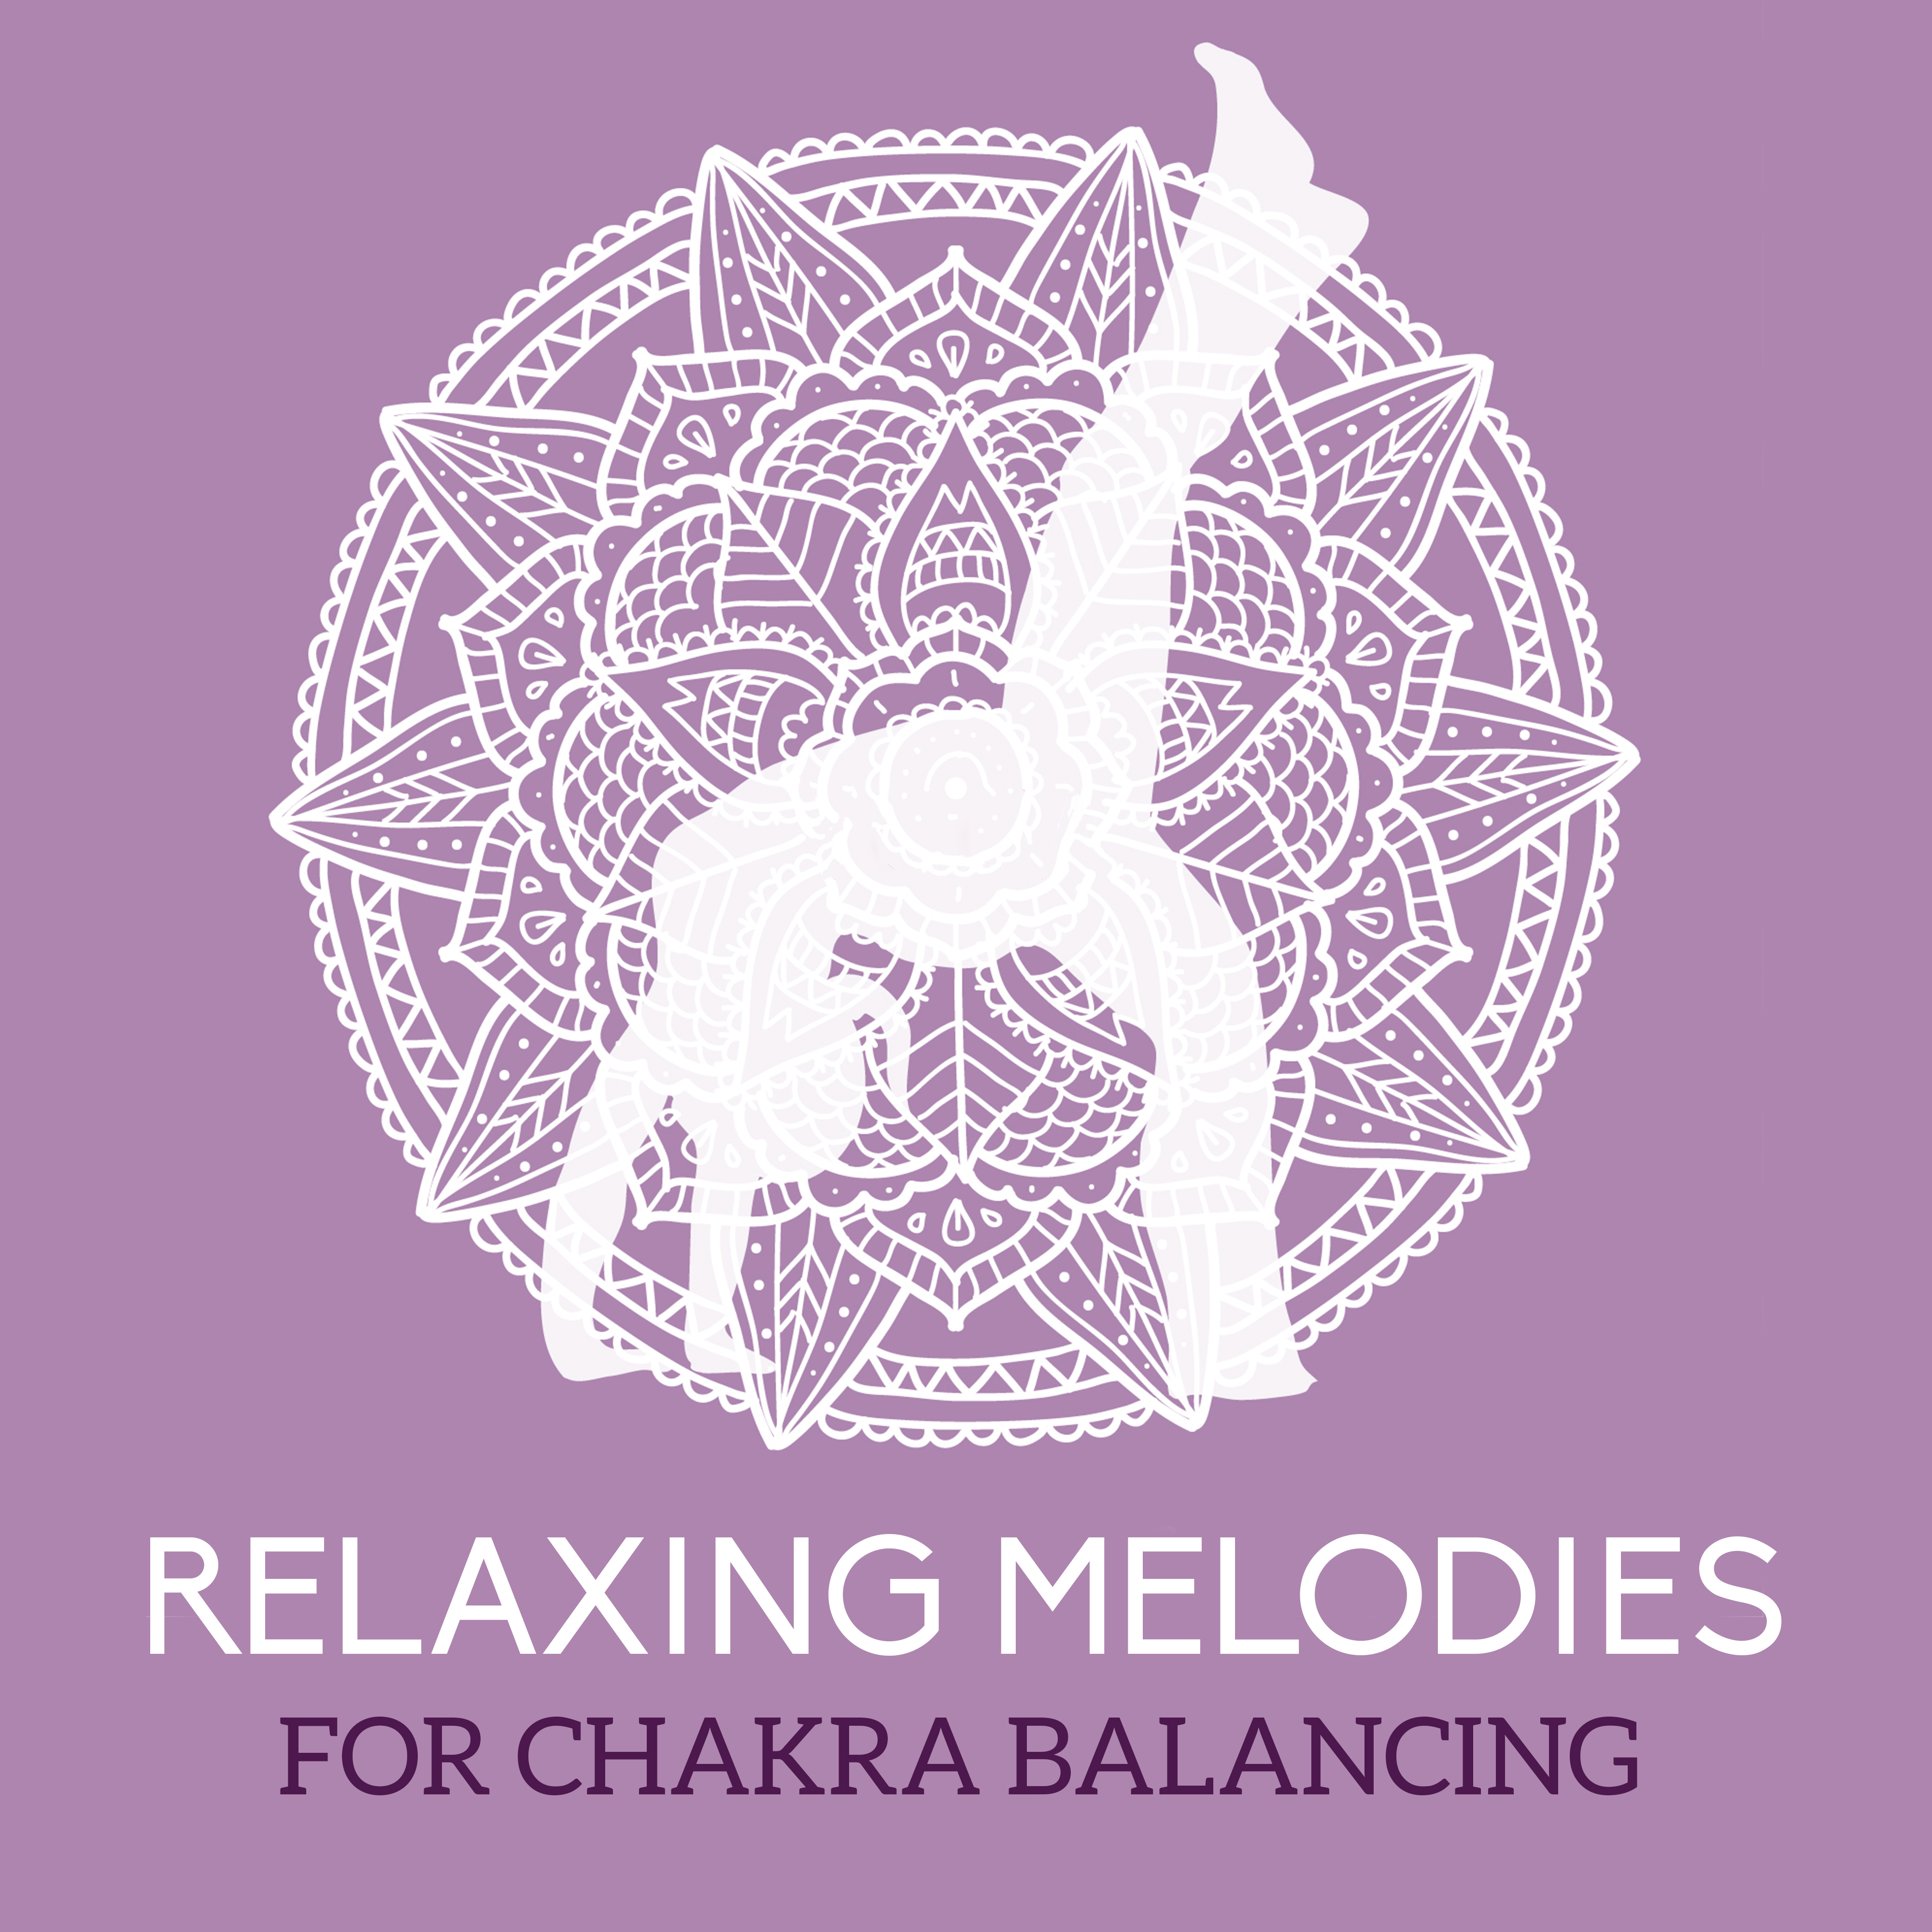 Relaxing Melodies for Chakra Balancing